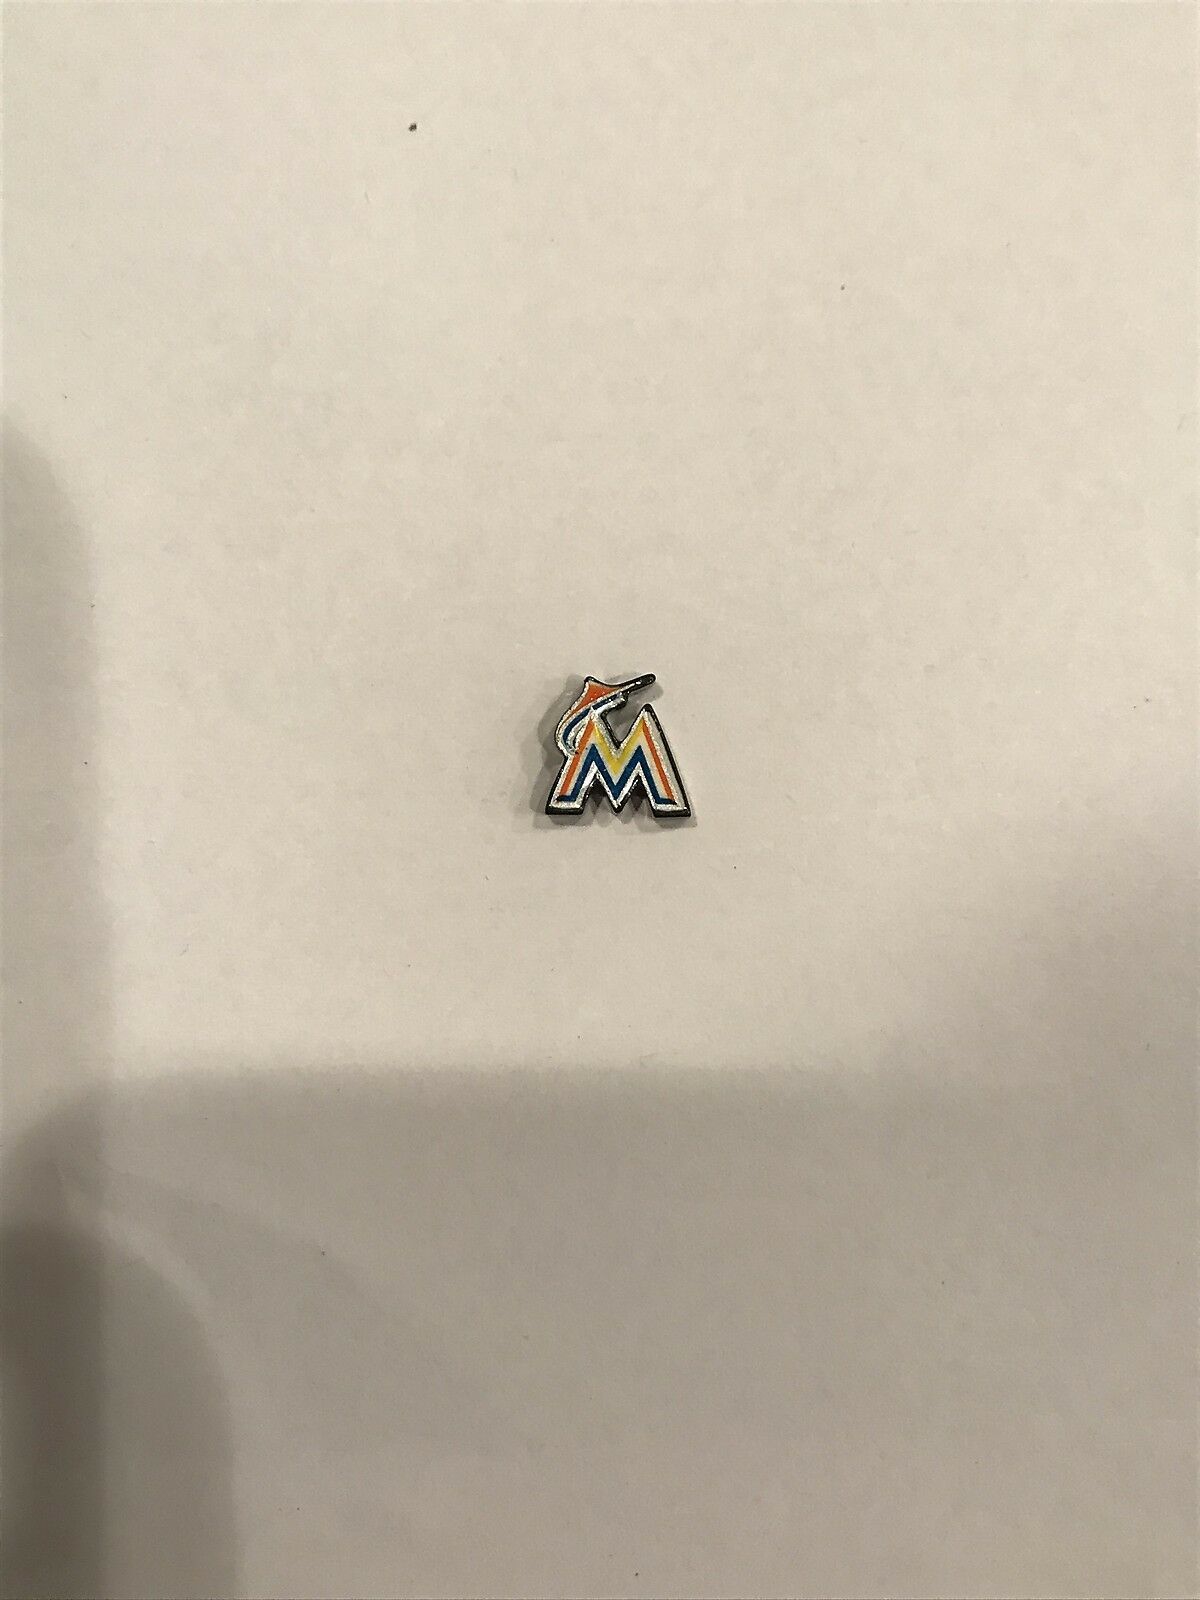 Primary image for Origami Owl Charm (new) Miami Marlins